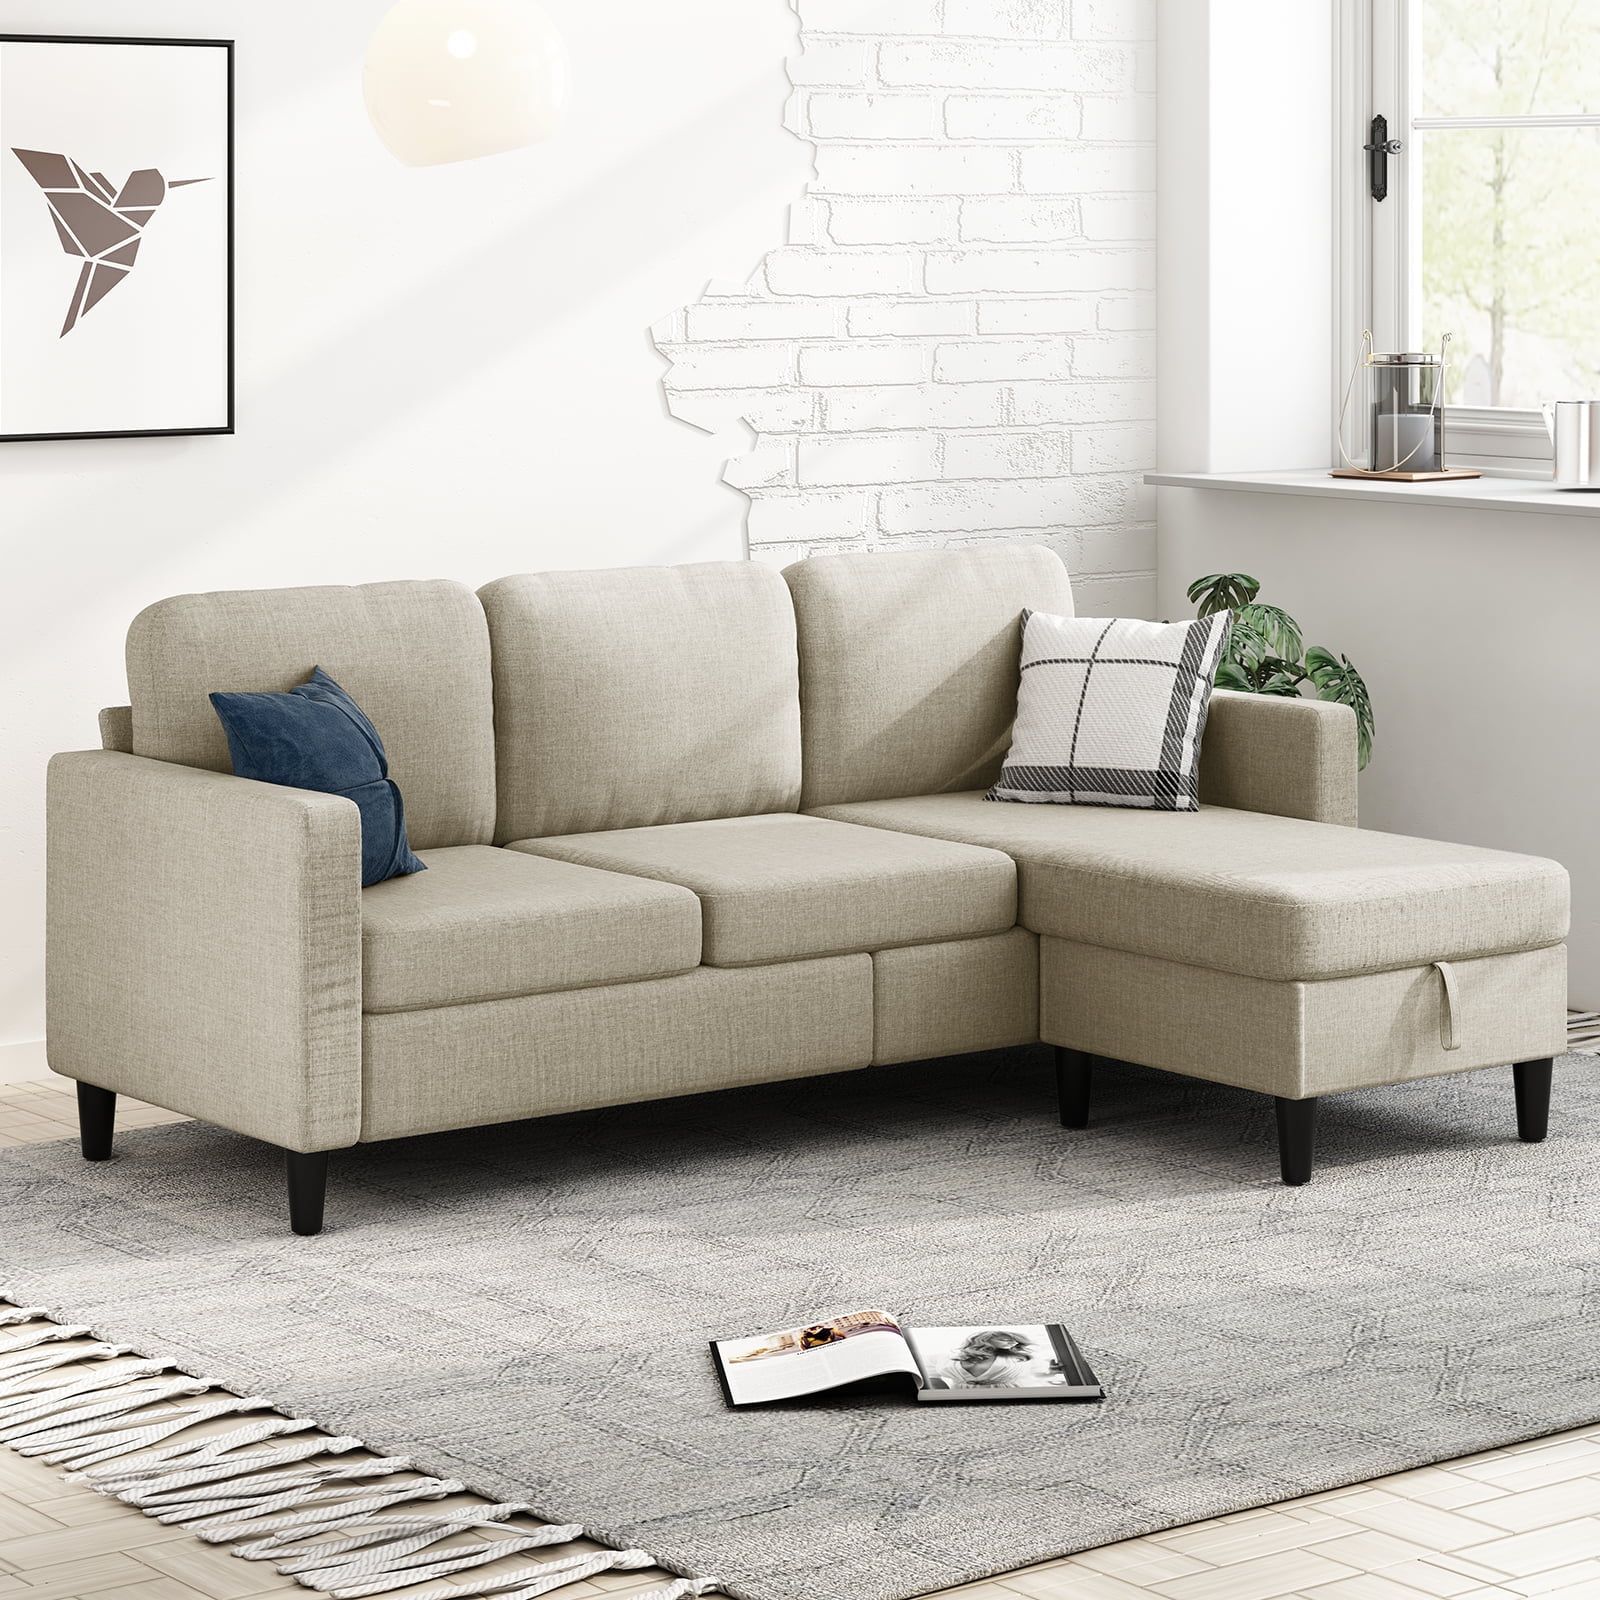 Muzz Sectional Sofa With Movable Ottoman, Free Combination Sectional Couch, Small  L Shaped Sectional Sofa With Storage Ottoman, Modern Linen Fabric Wood  Frame Sofa Set For Living Room (beige) – Walmart With Regard To Small L Shaped Sectional Sofas In Beige (Photo 1 of 15)